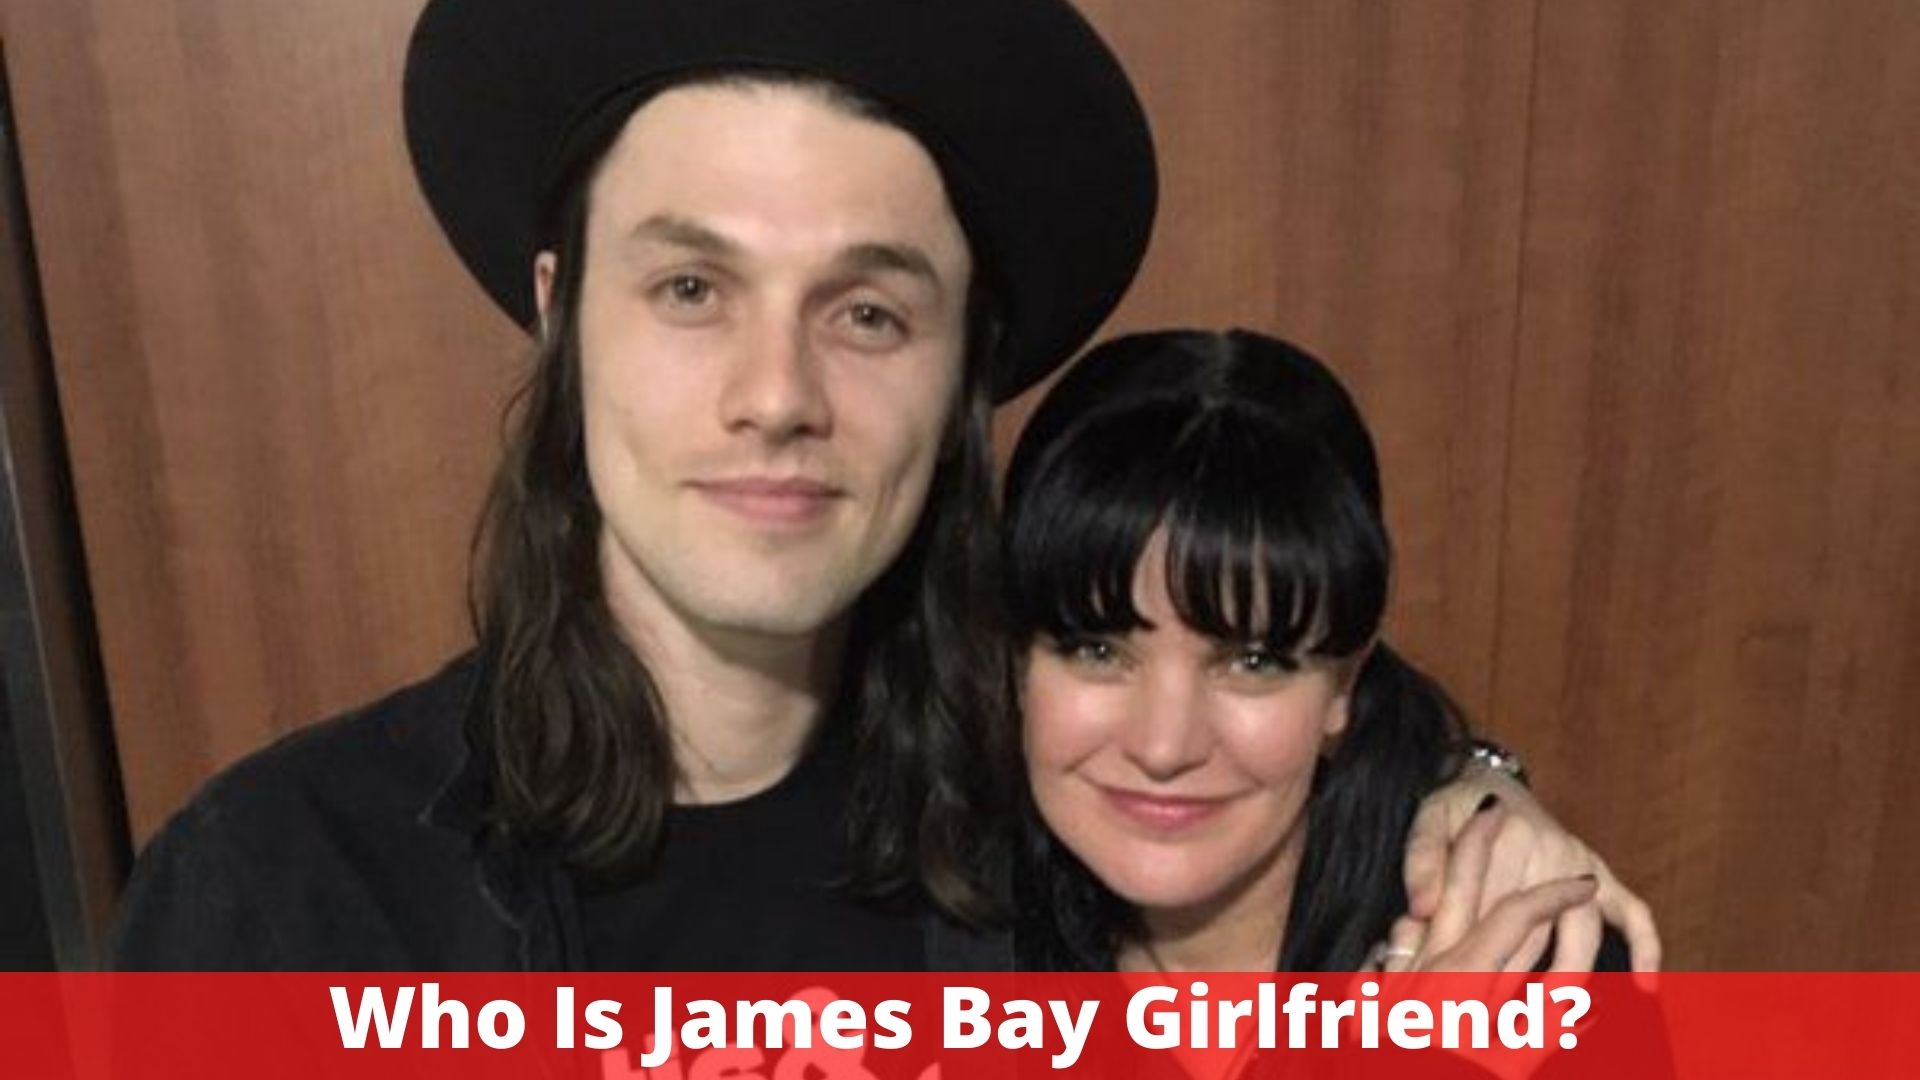 Who Is James Bay Girlfriend?